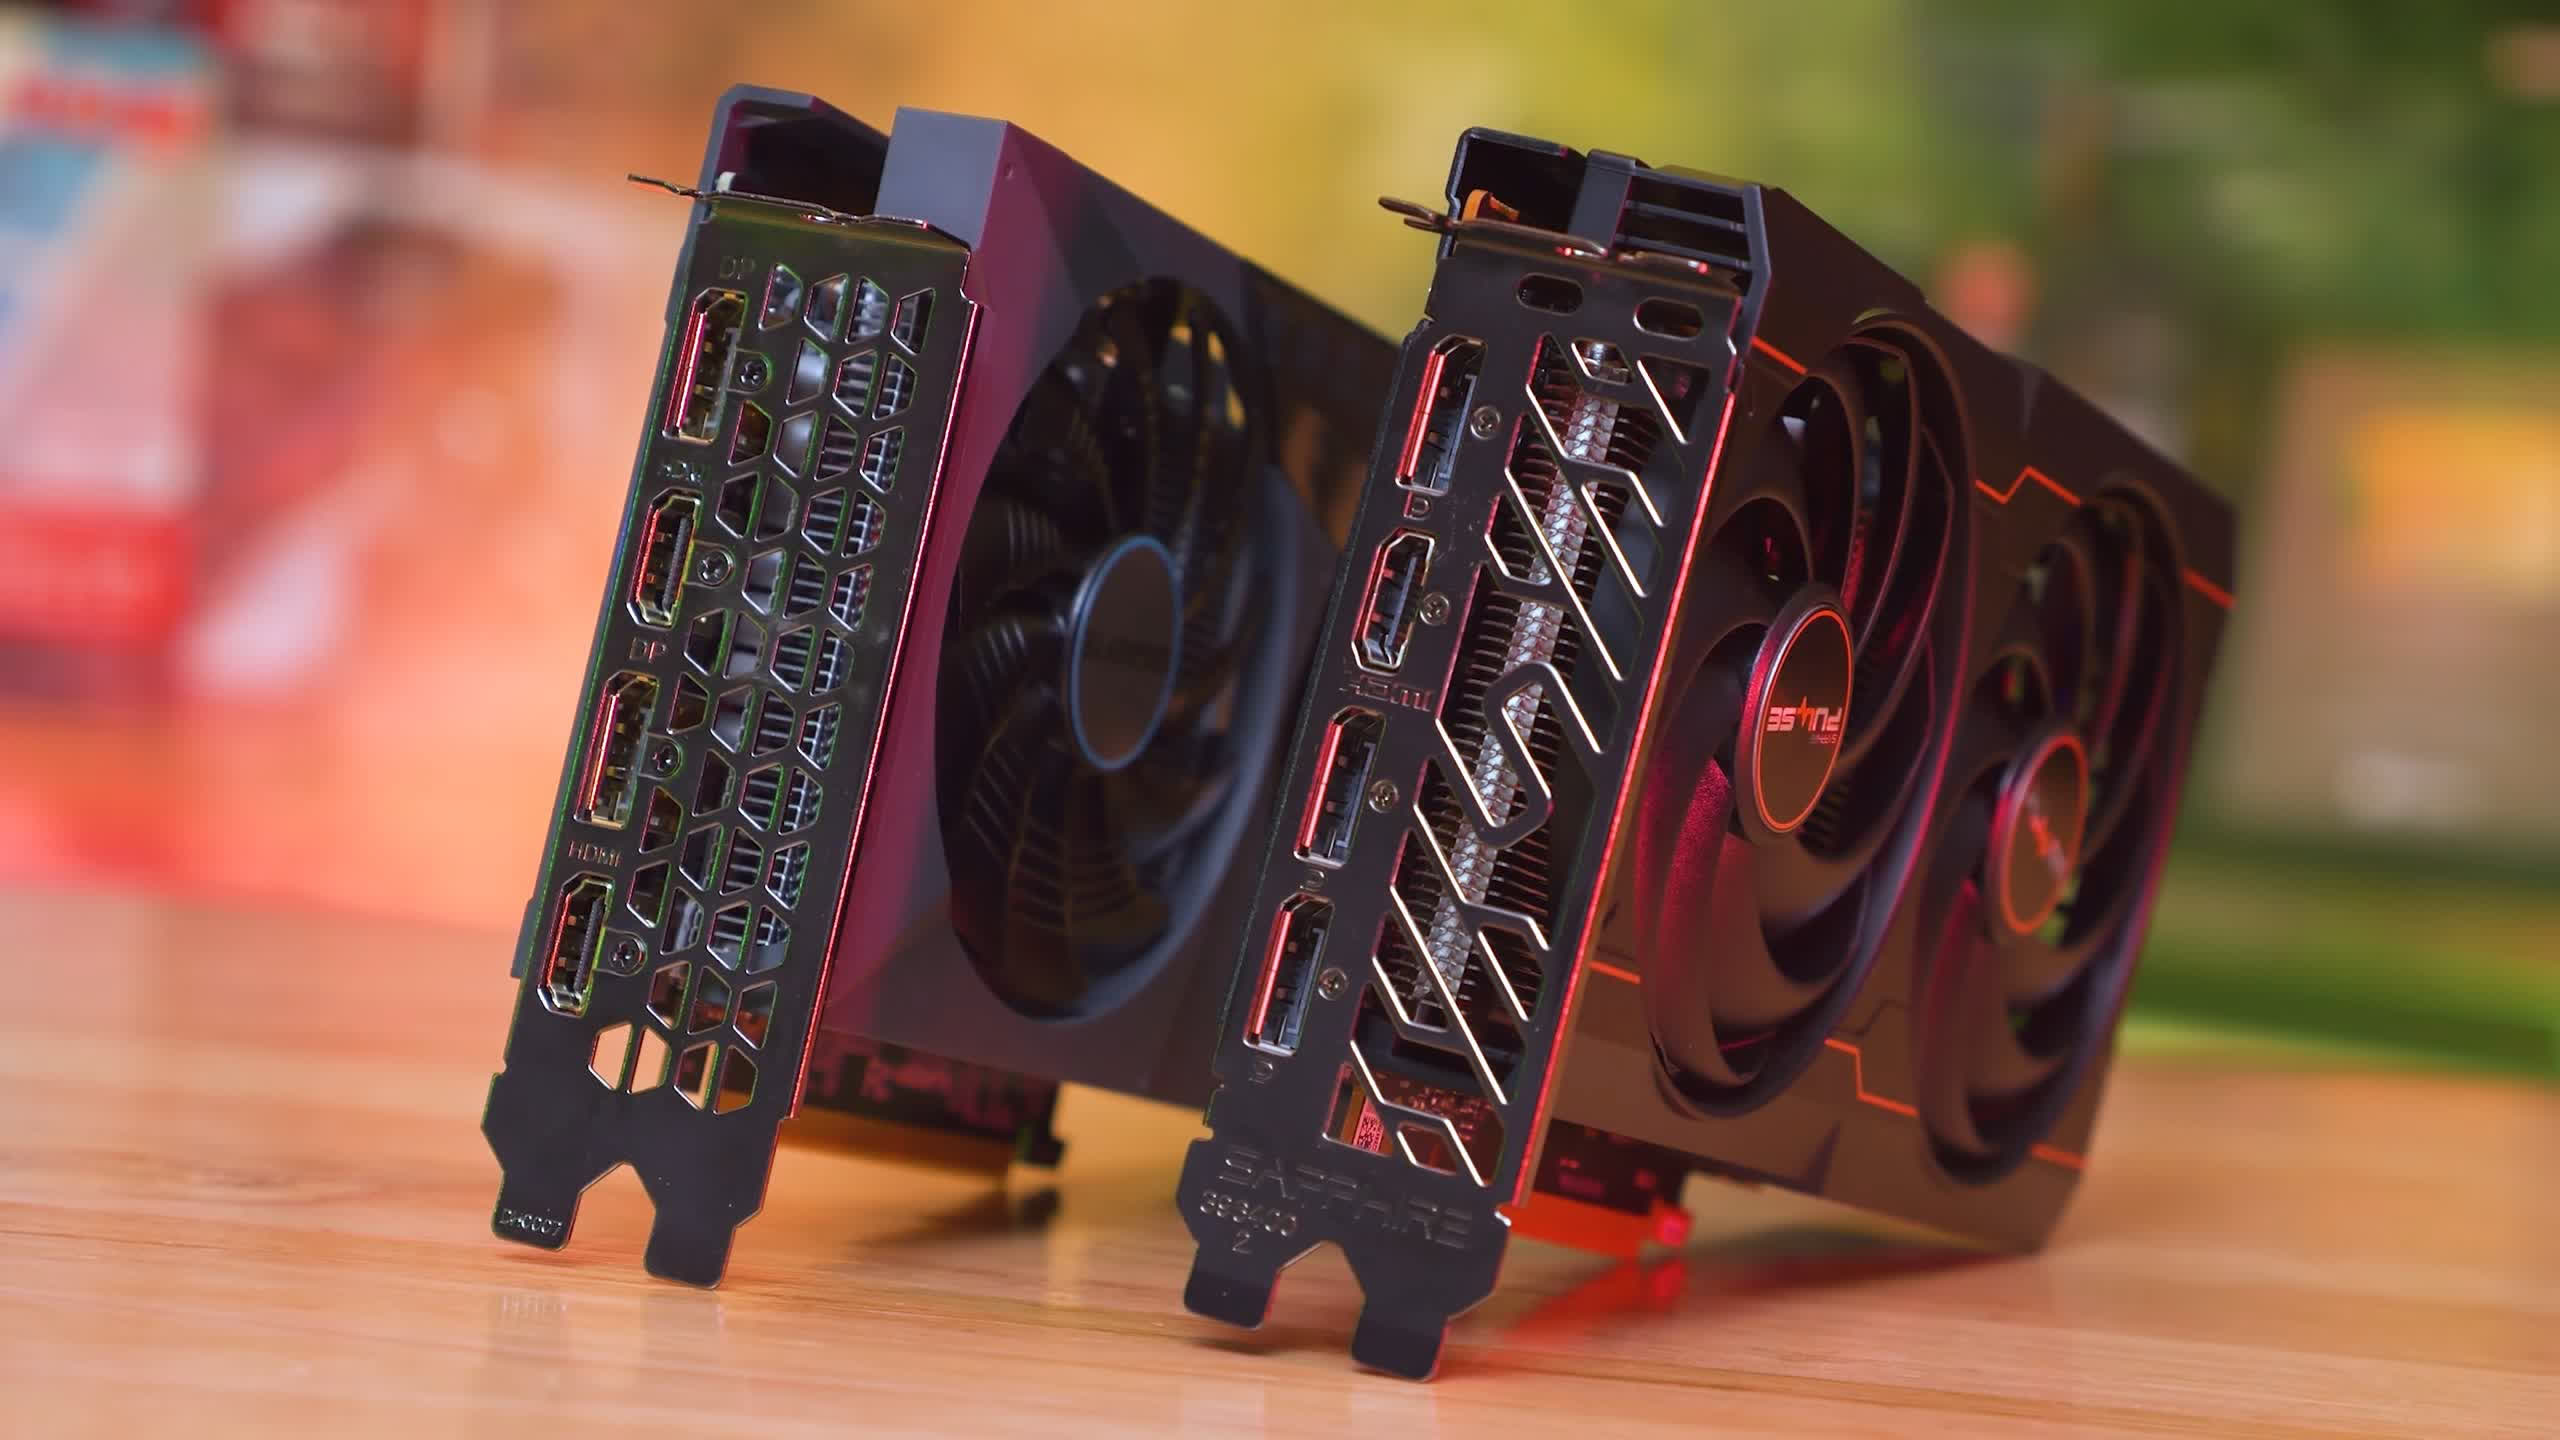 Ethereum Merge hits graphic cards, but GPU-based mining is not dead